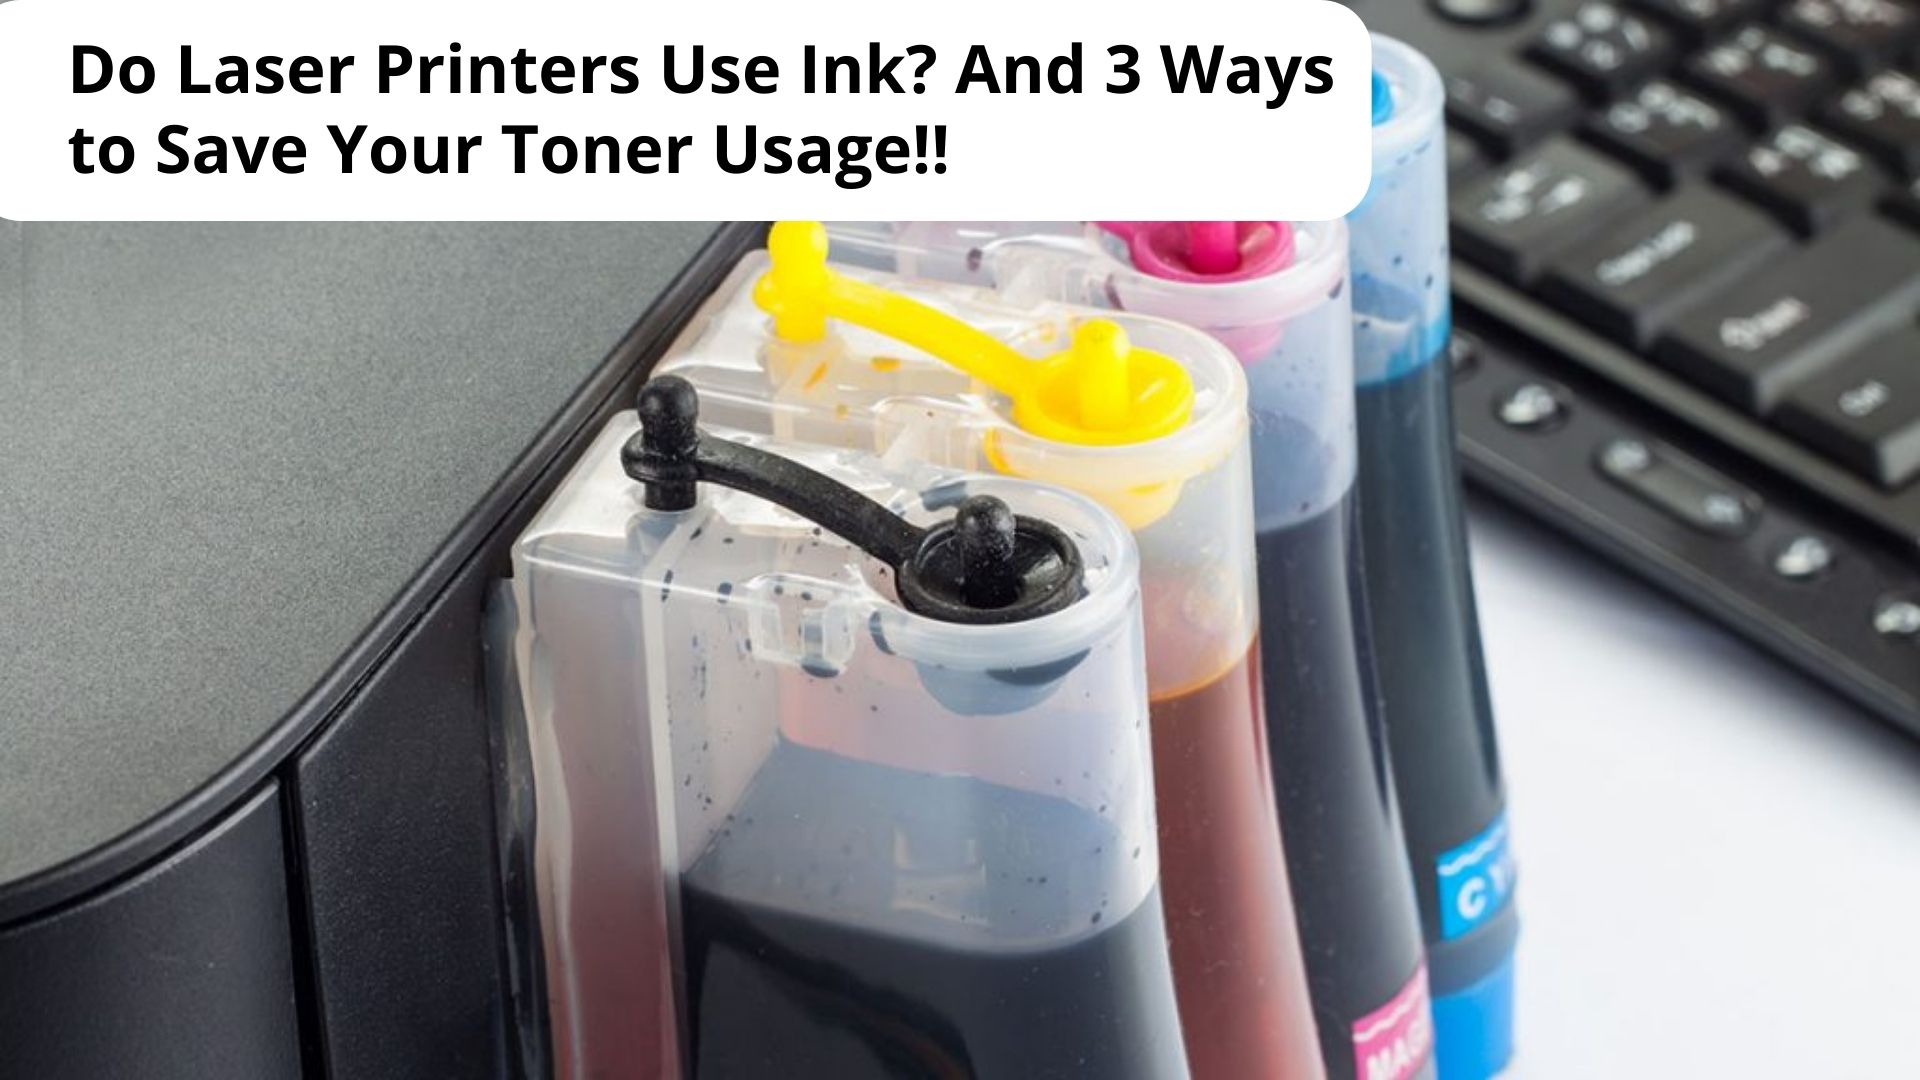 Do Laser Printers Use Ink And 3 Ways to Save Your Toner Usage!!